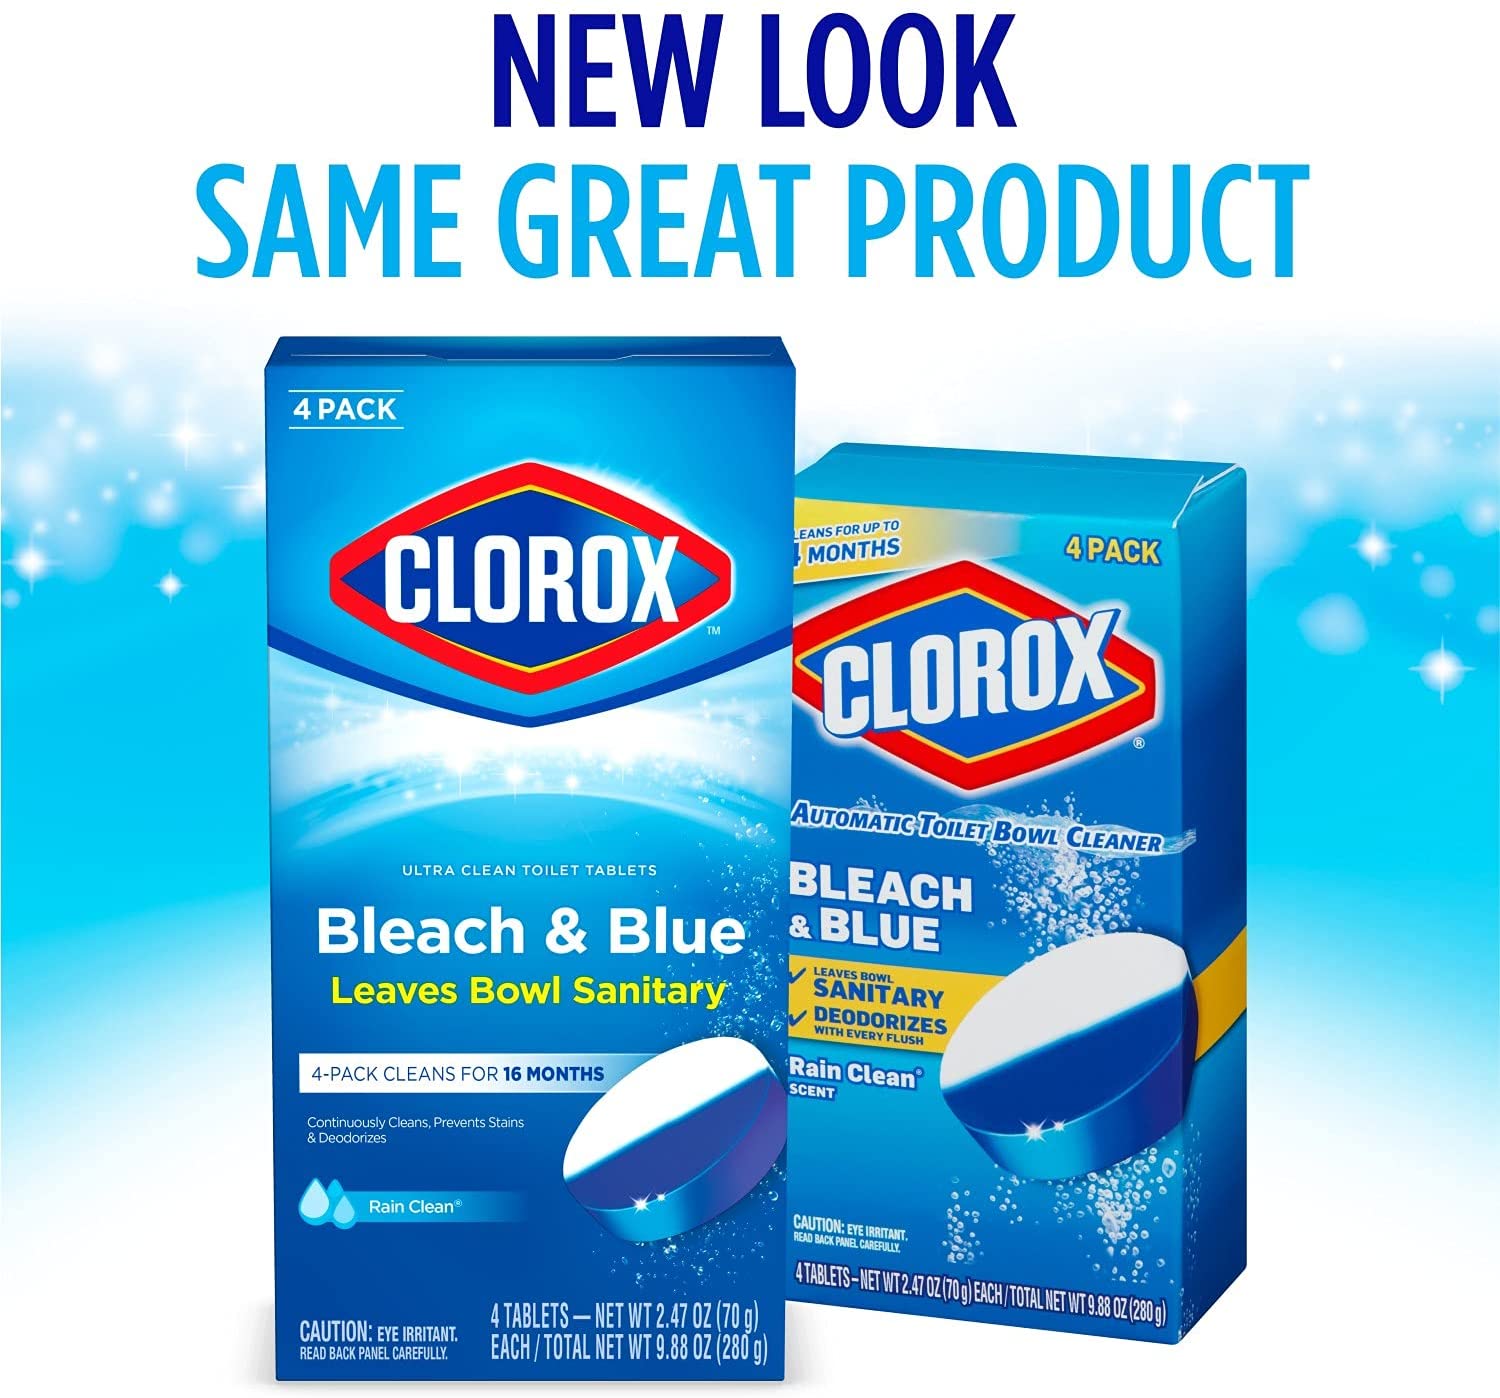 4-Count Clorox Ultra Clean Toilet Tablets Bleach & Blue (Rain Clean Scent) $7.51 ($1.87 each) w/ S&S + Free Shipping w/ Prime or on $25+